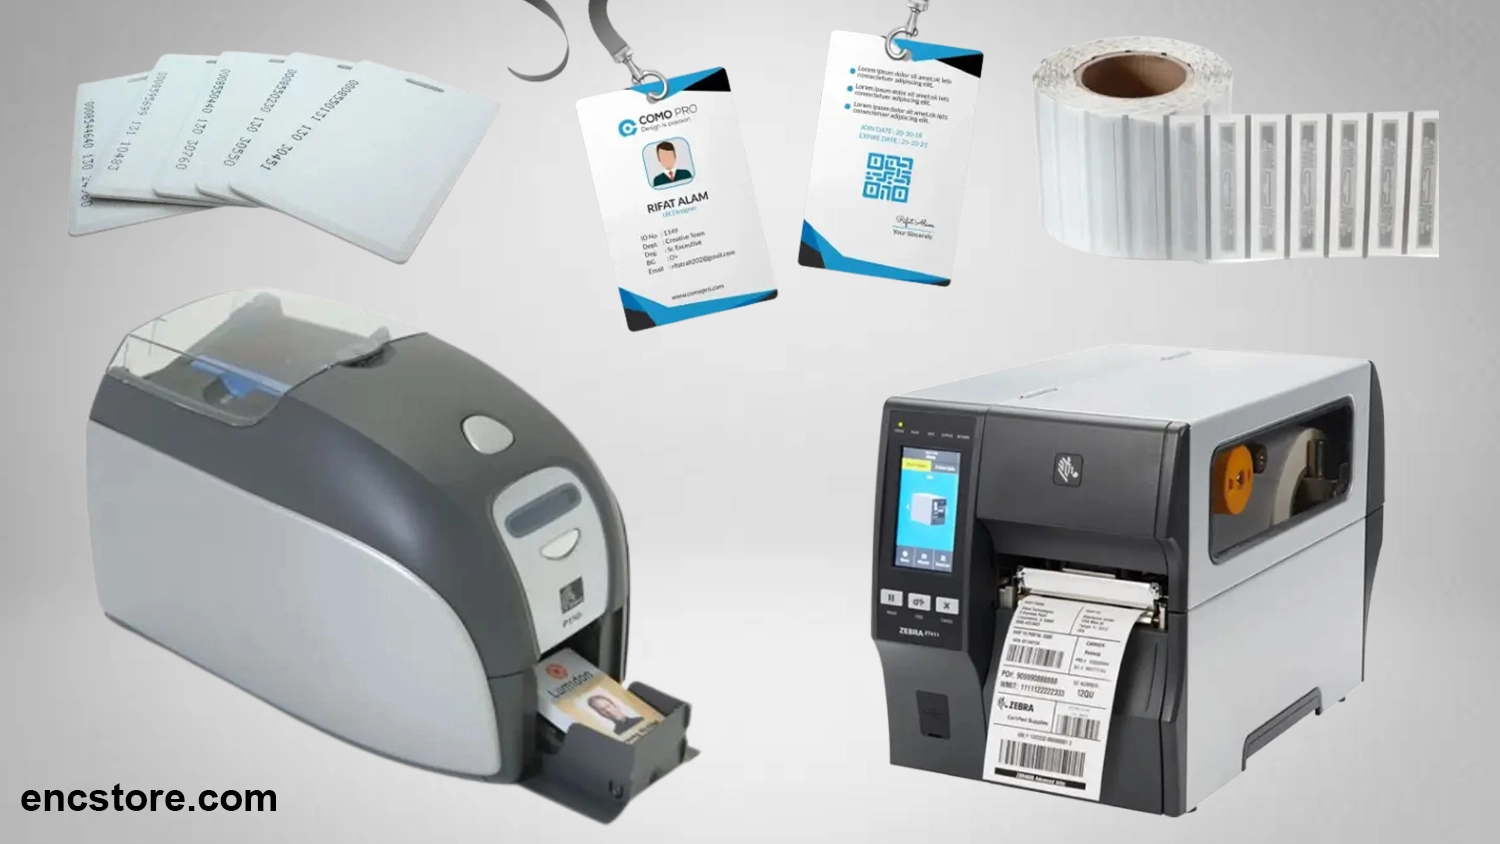 How do you select the right RFID printer/encoder for RFID applications?